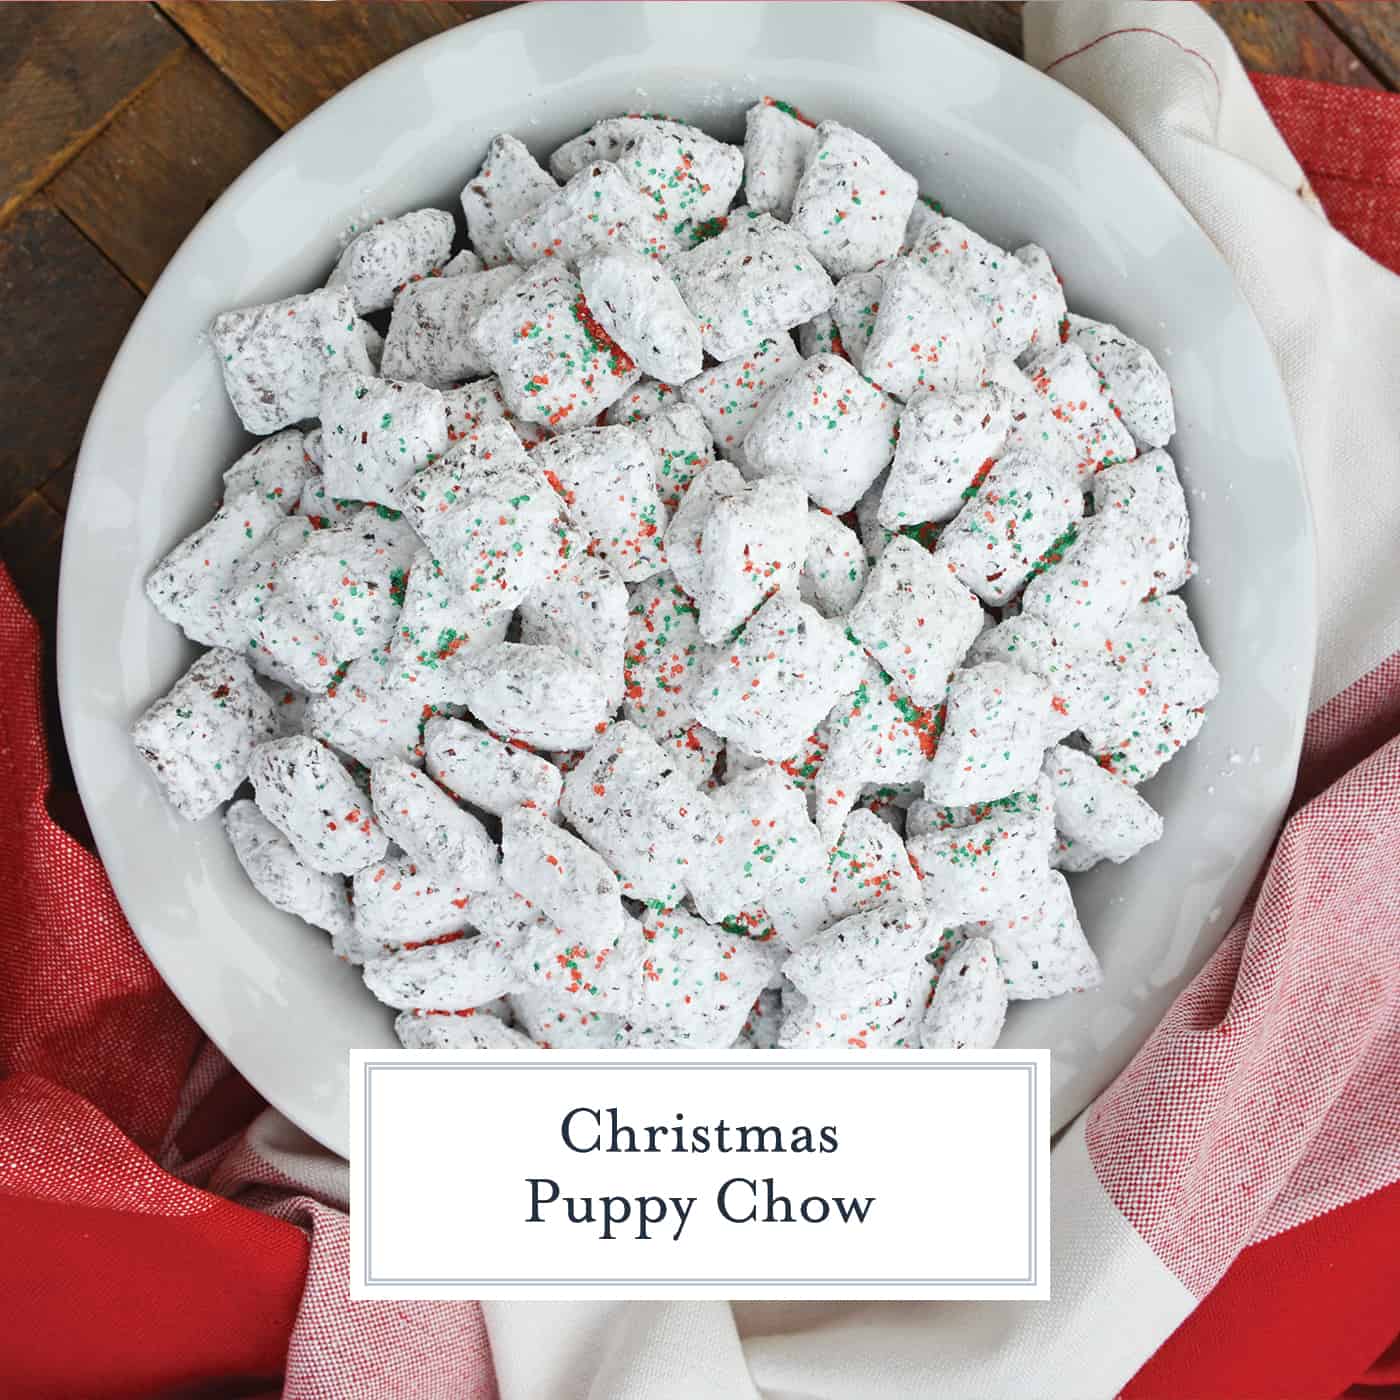 Christmas Puppy Chow Transforms A Traditional Muddy Buddy Recipe Into A Festive Reindeer Chow Mix,Portable Gas Grills Amazon